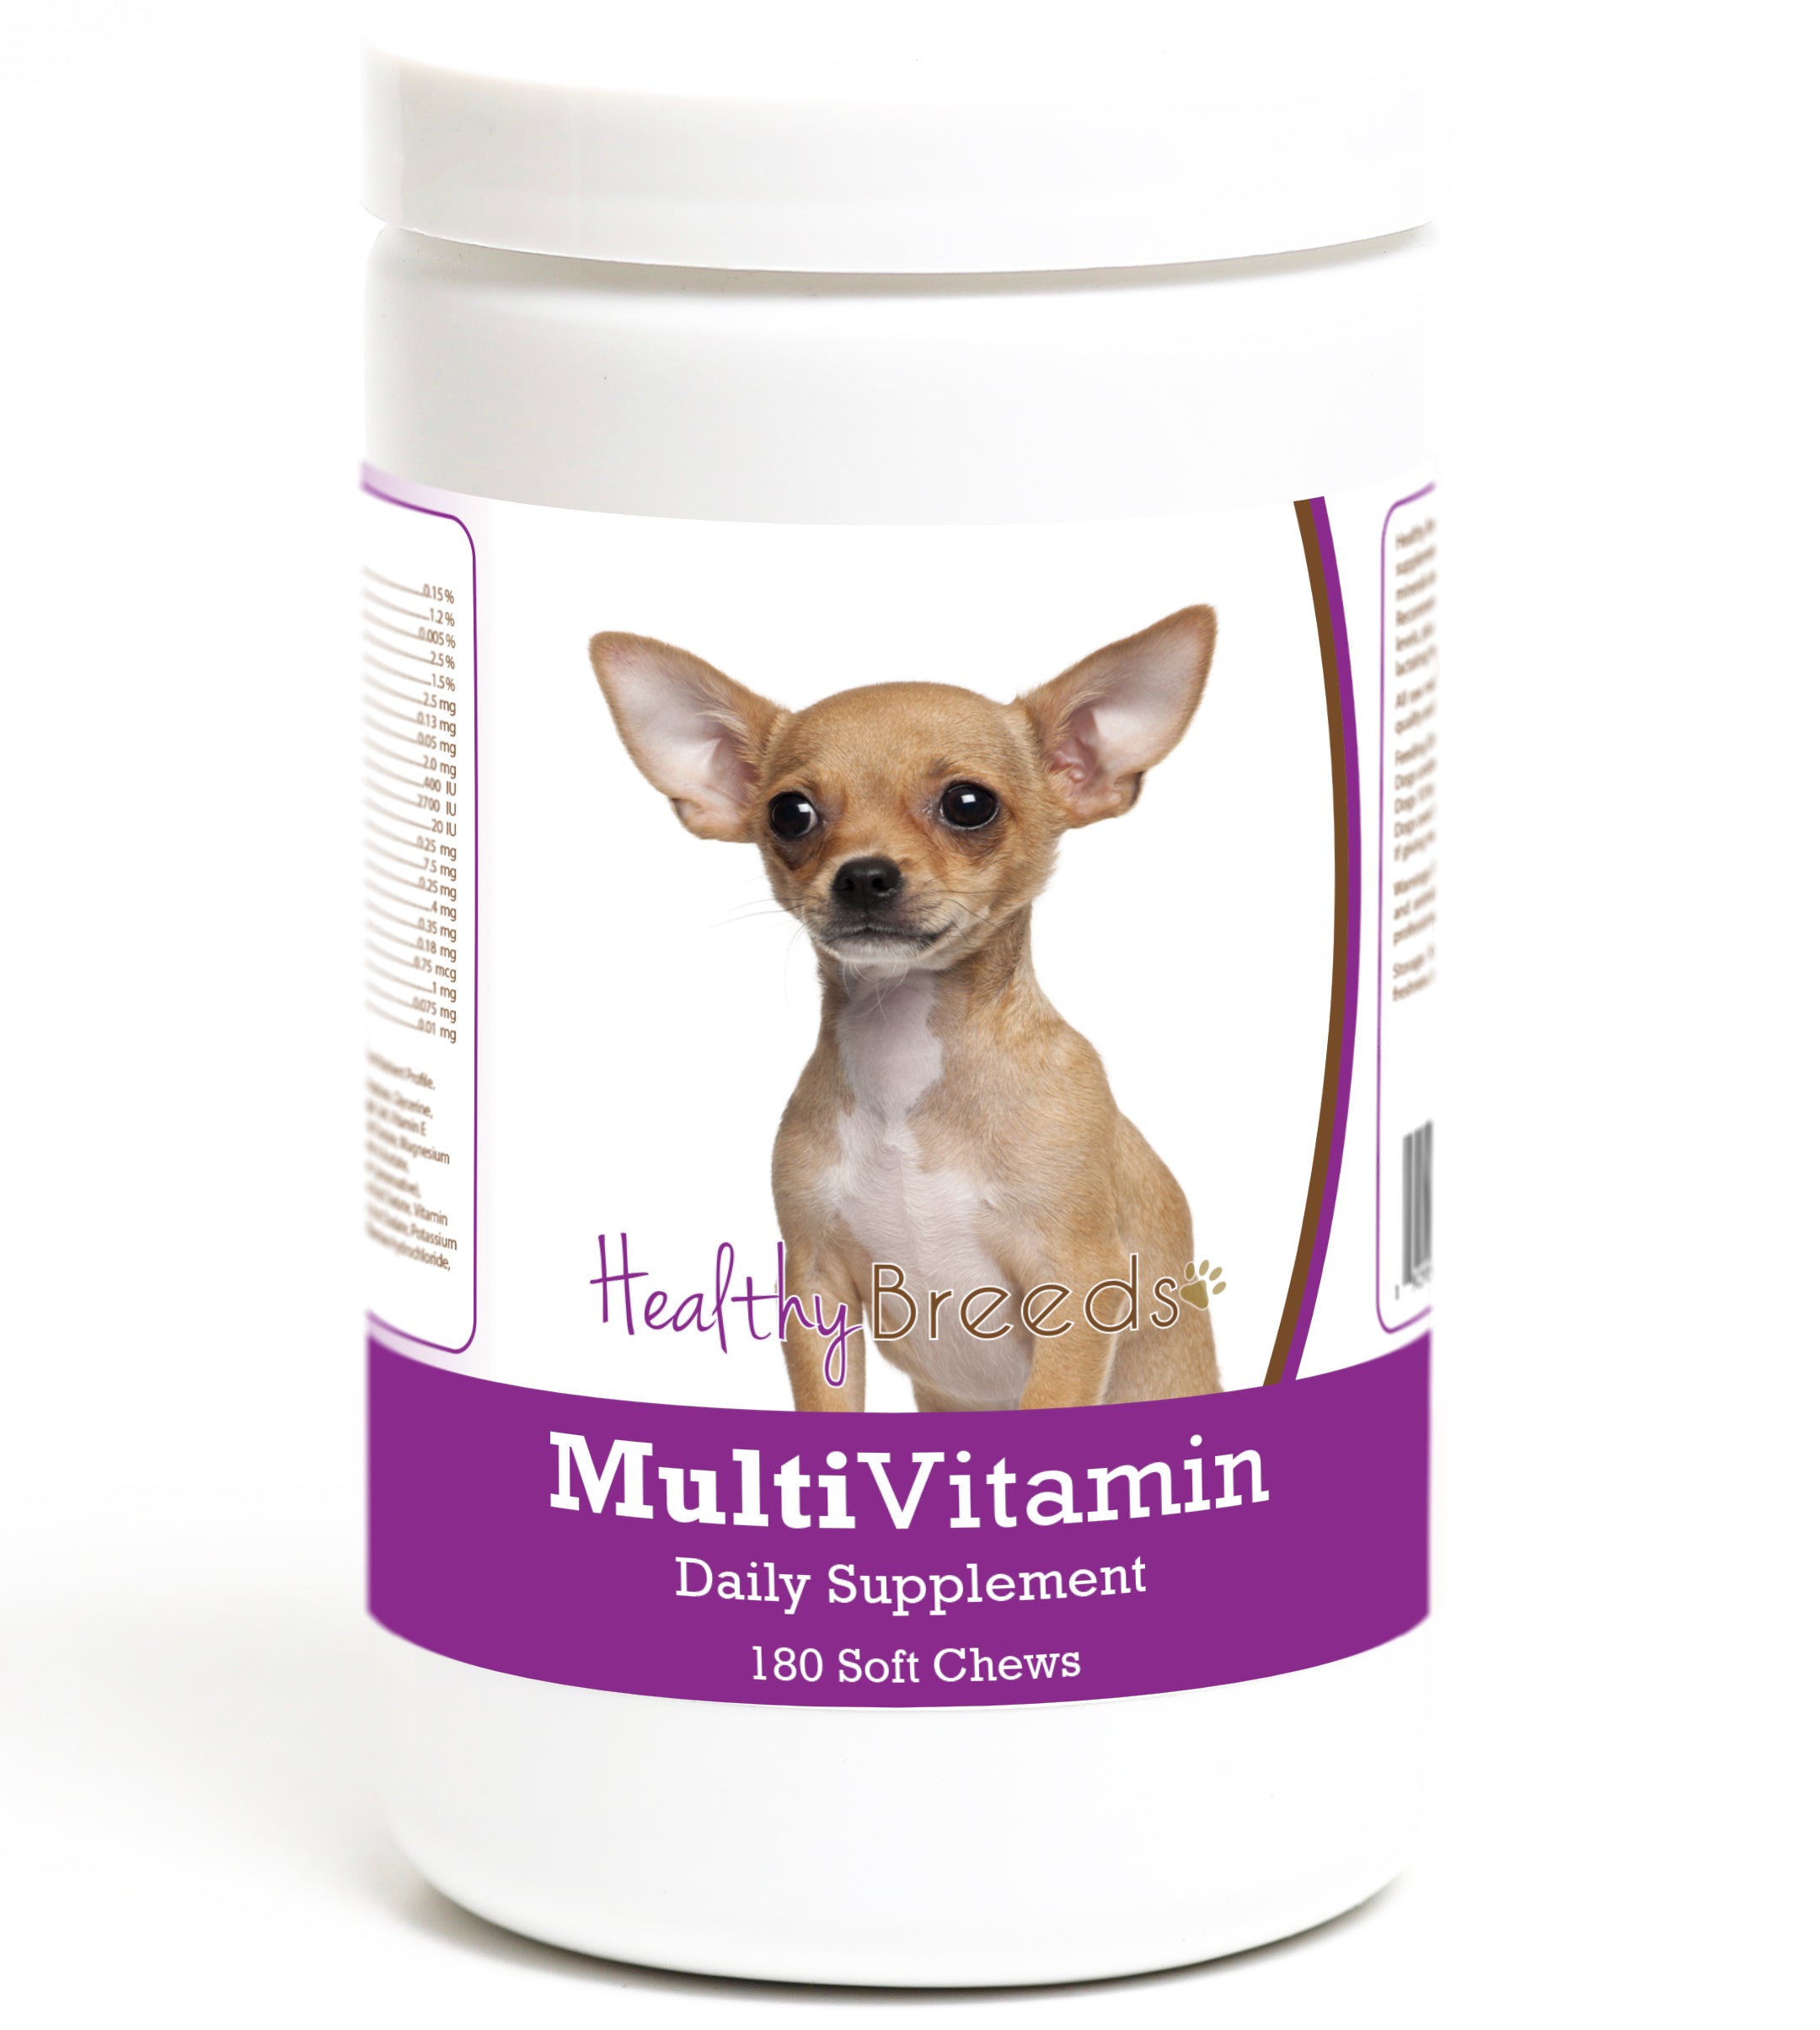 Chihuahua Multivitamin Soft Chew for Dogs 180 Count